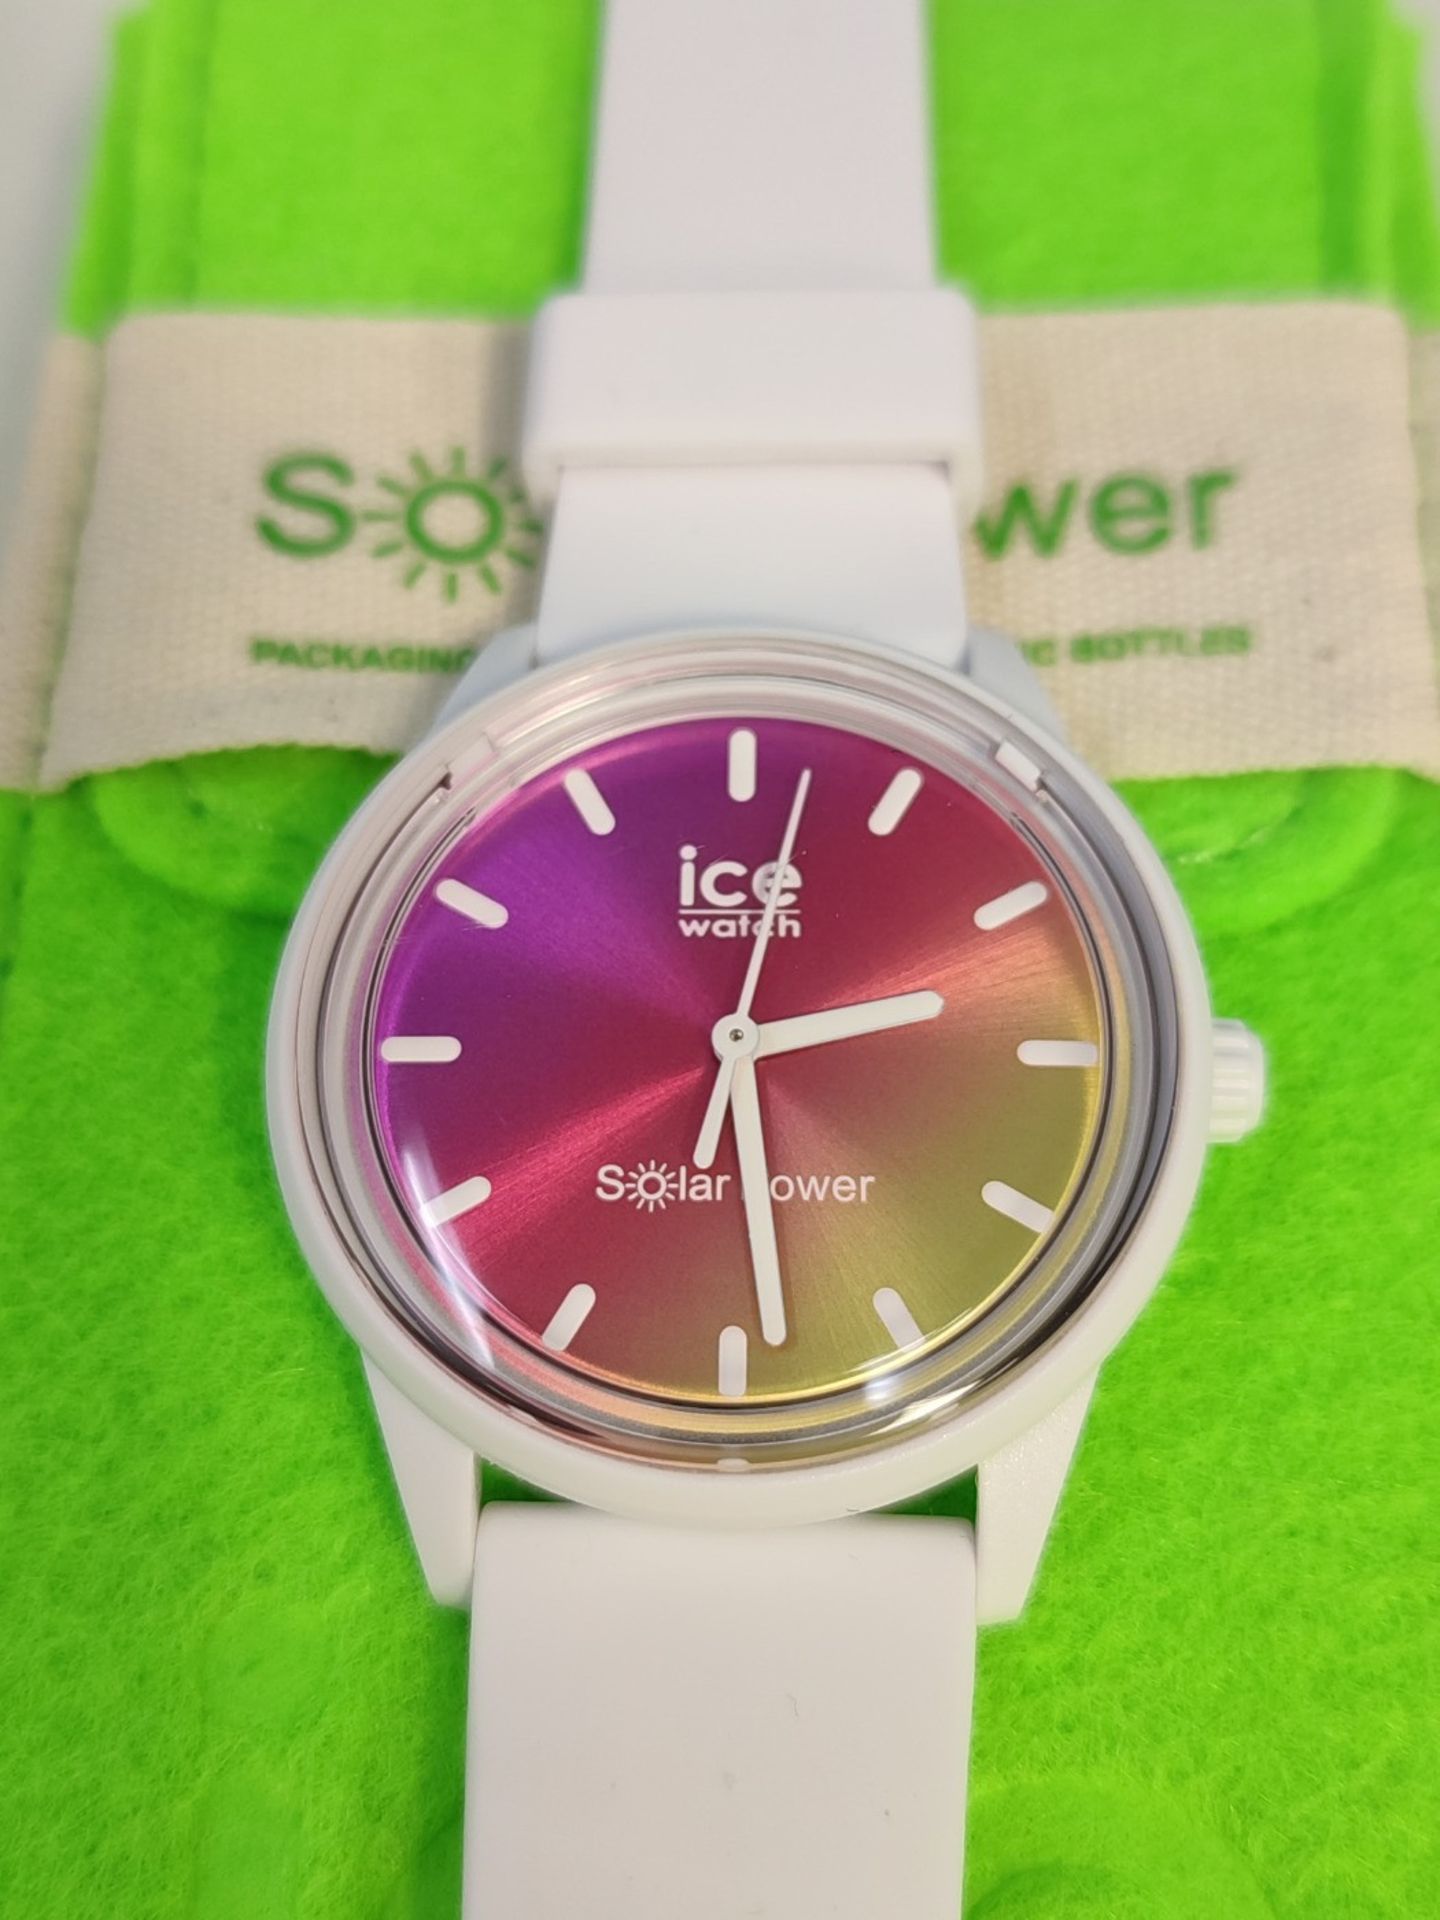 RRP £63.00 Ice-Watch - ICE solar power Sunset California - White women's watch with silicone stra - Image 2 of 6